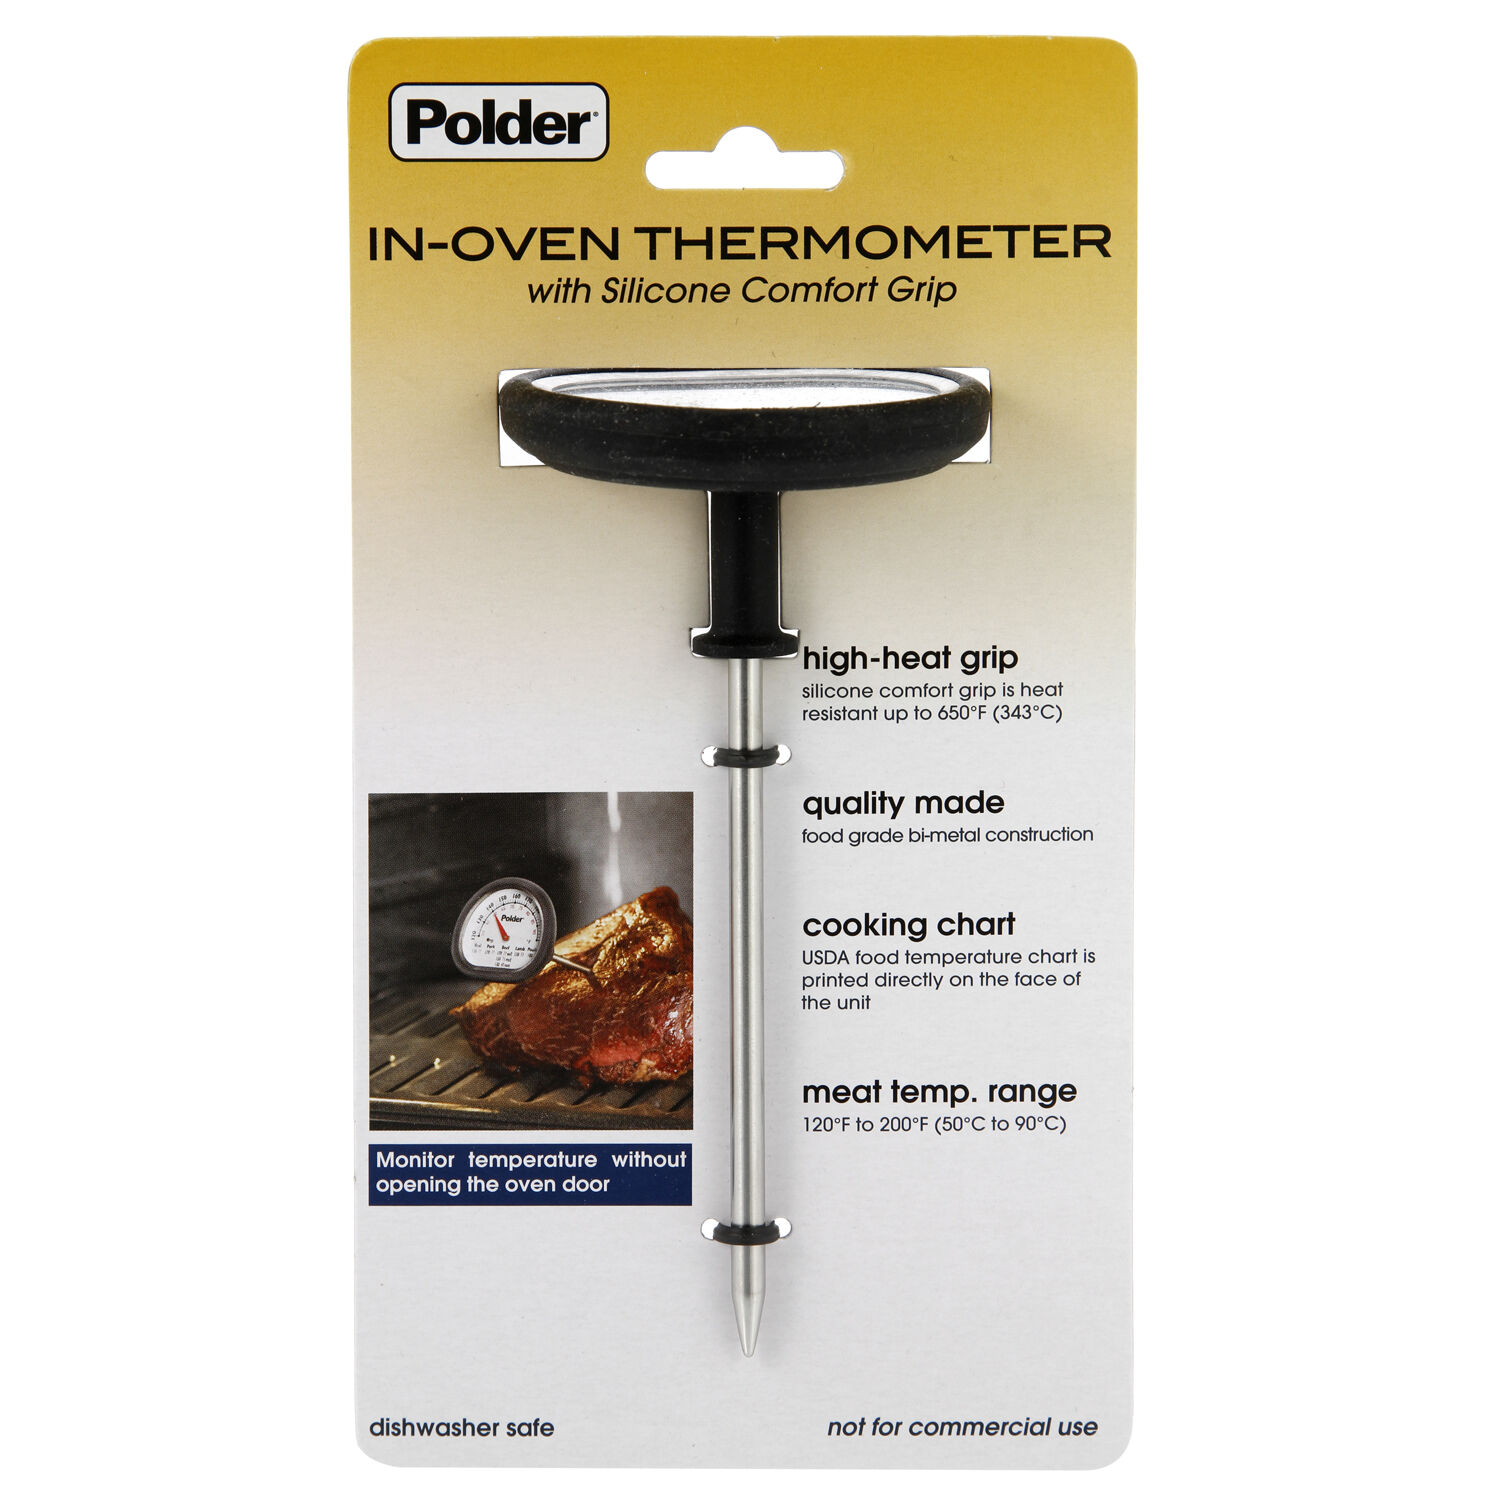 https://www.homestoreandmore.co.uk/dw/image/v2/BCBN_PRD/on/demandware.static/-/Sites-master/default/dw3aa65a0f/images/Polder-Deluxe-In-Oven-Meat-Thermometer-timers-thermometers-073908-hi-res-0.jpg?sw=1500